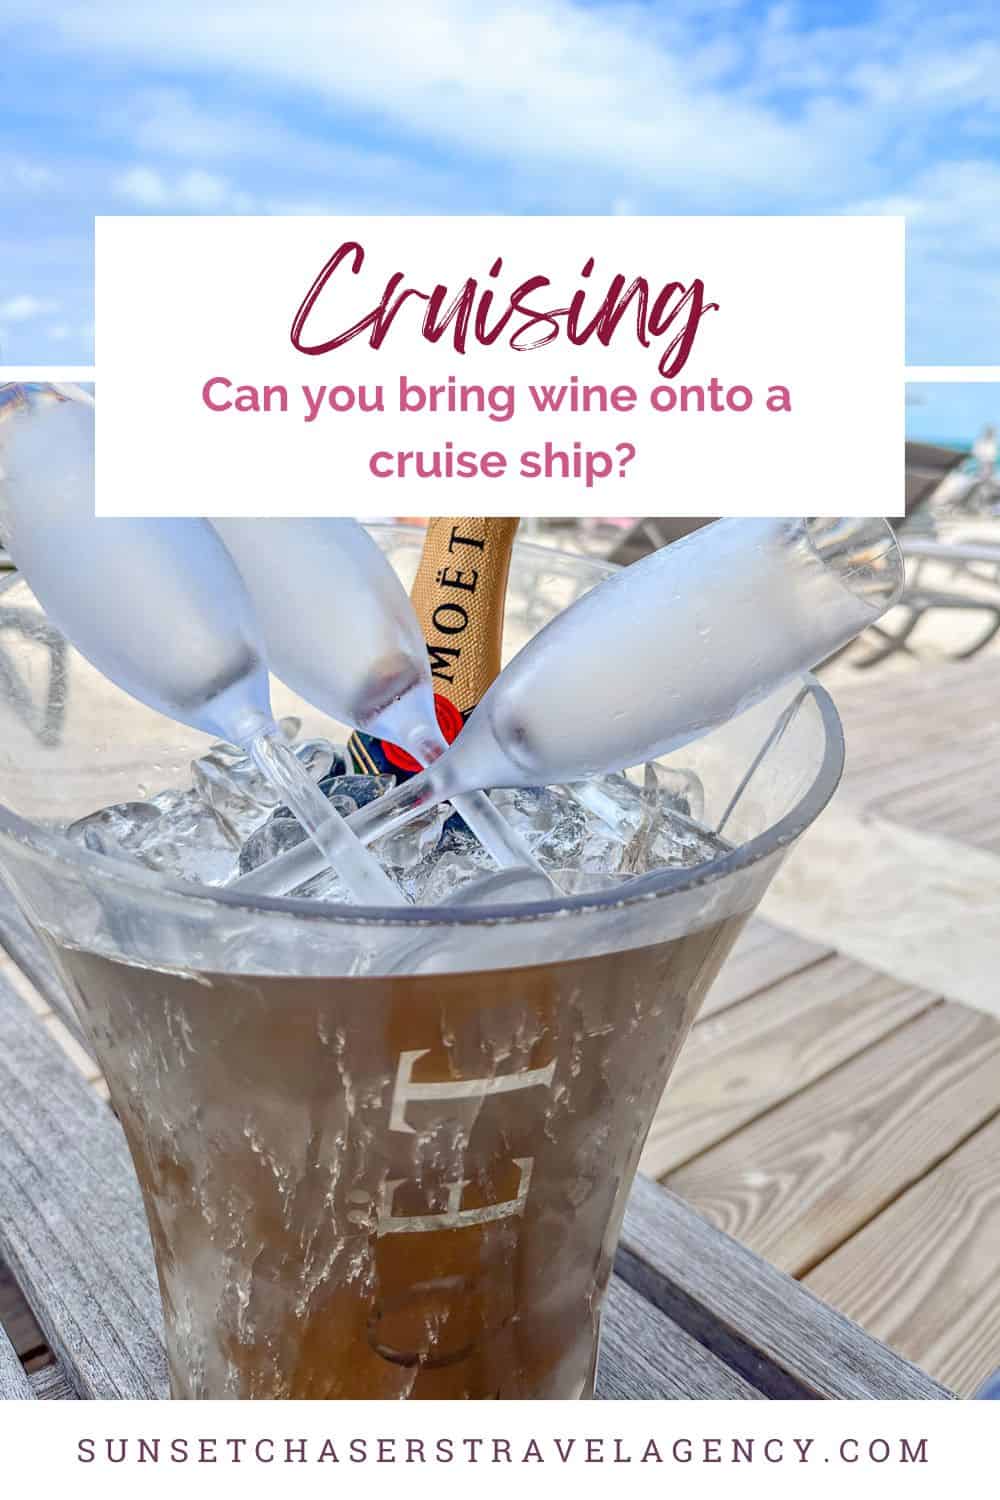 Can you bring wine onto a cruise ship?